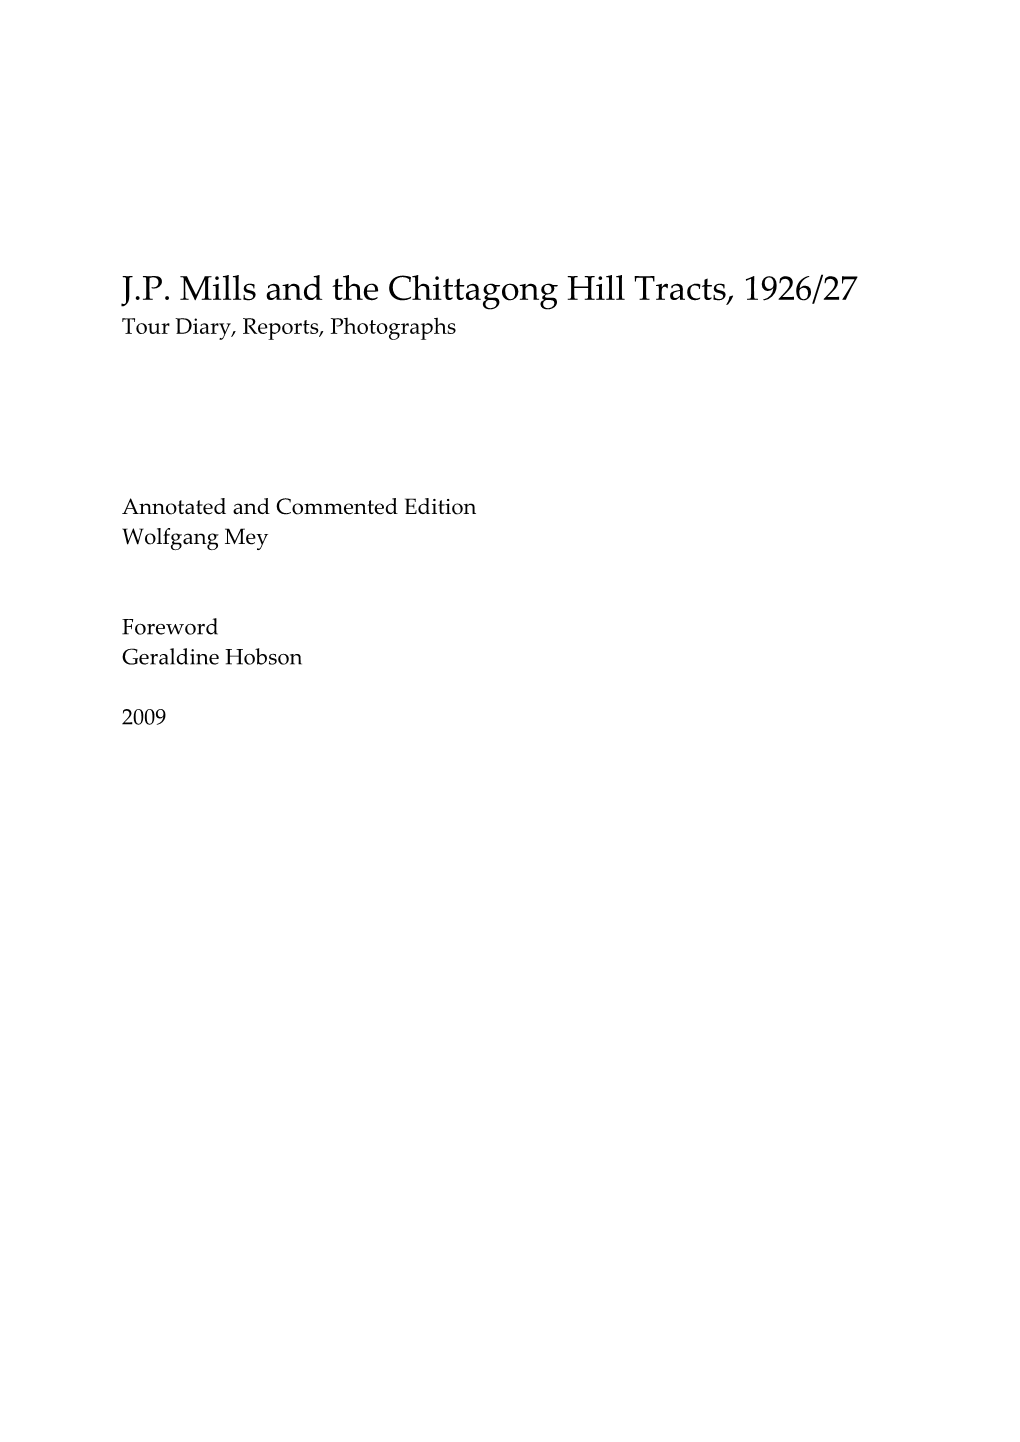 J.P. Mills and the Chittagong Hill Tracts, 1926/27 Tour Diary, Reports, Photographs